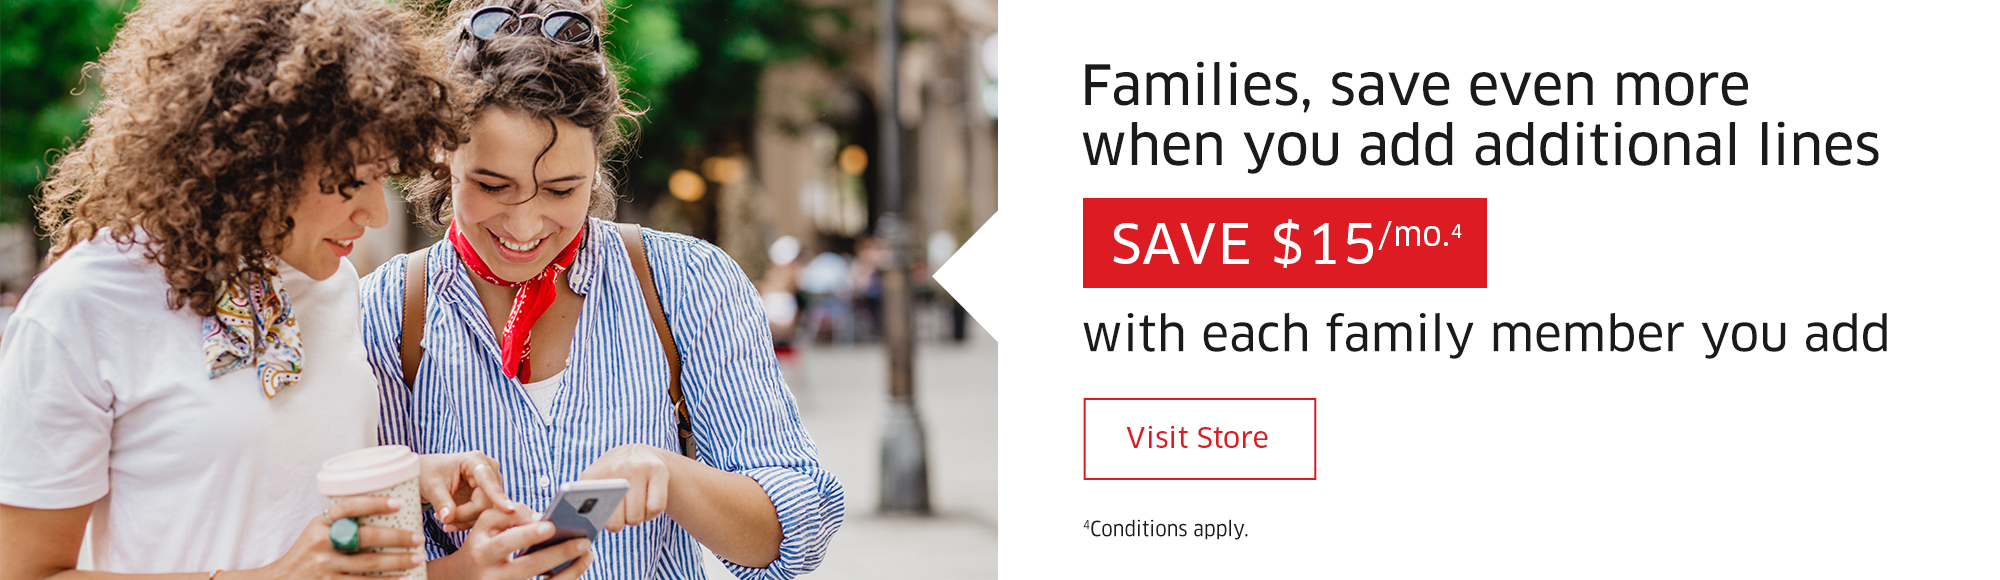 Families, save even more when you add additional lines  SAVE $15/mo.4  with each family member you add  Visit Store  4Conditions apply.